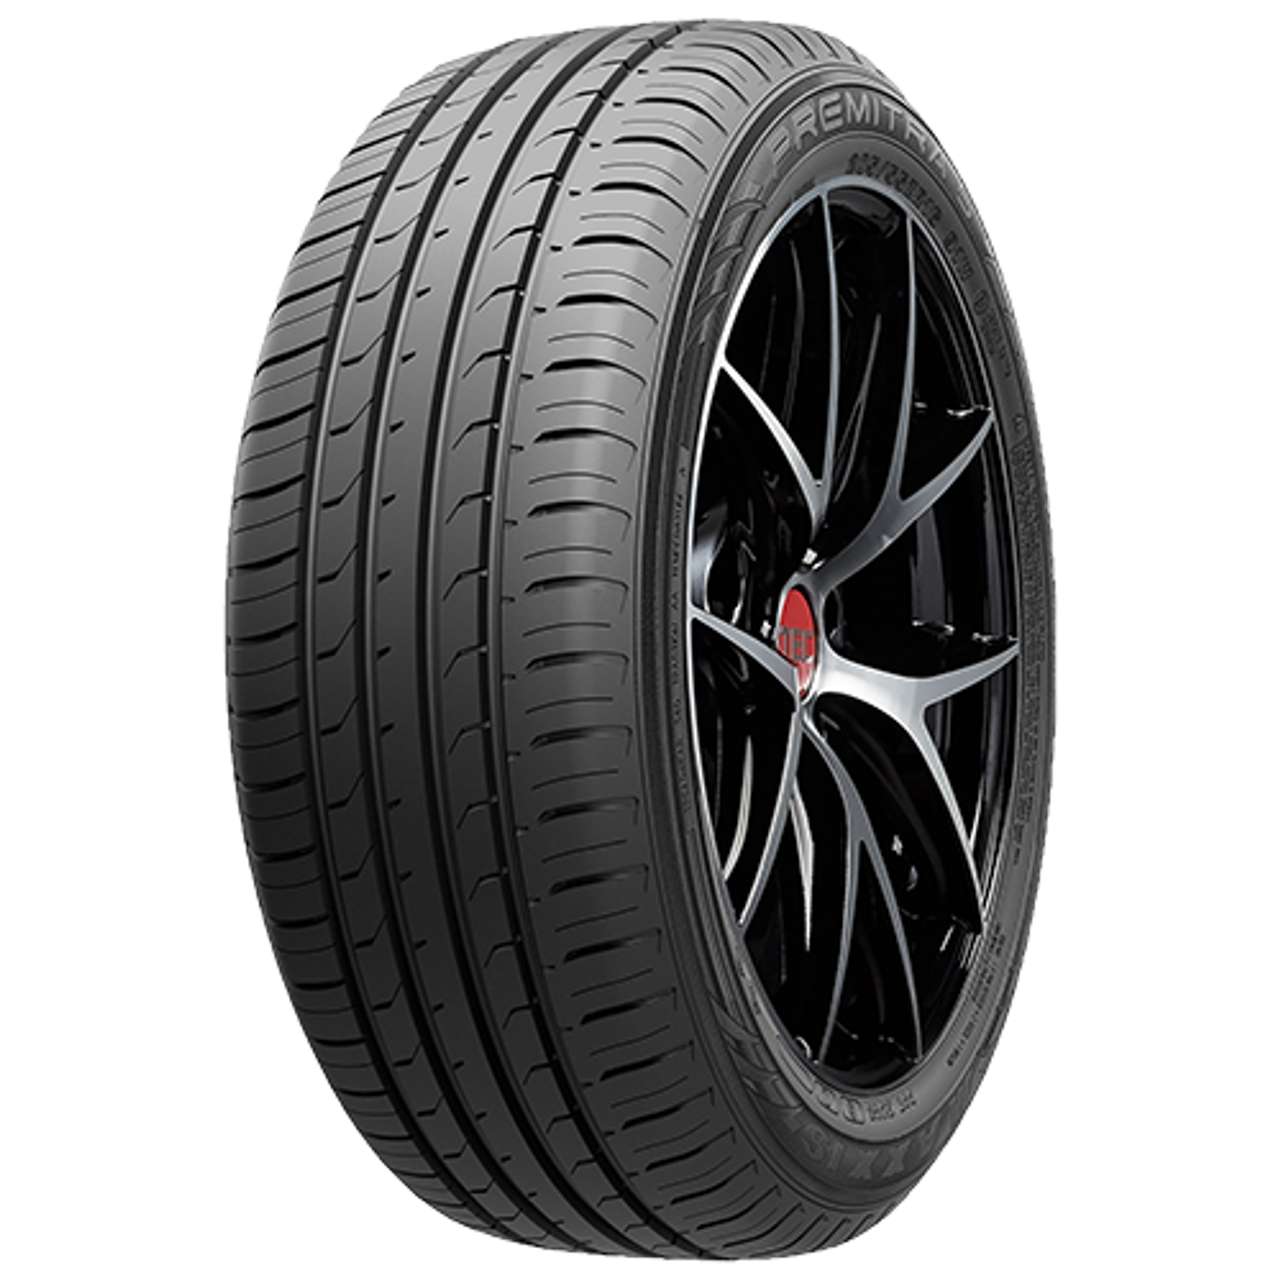 MAXXIS PREMITRA HP5 225/55R18 98V BSW